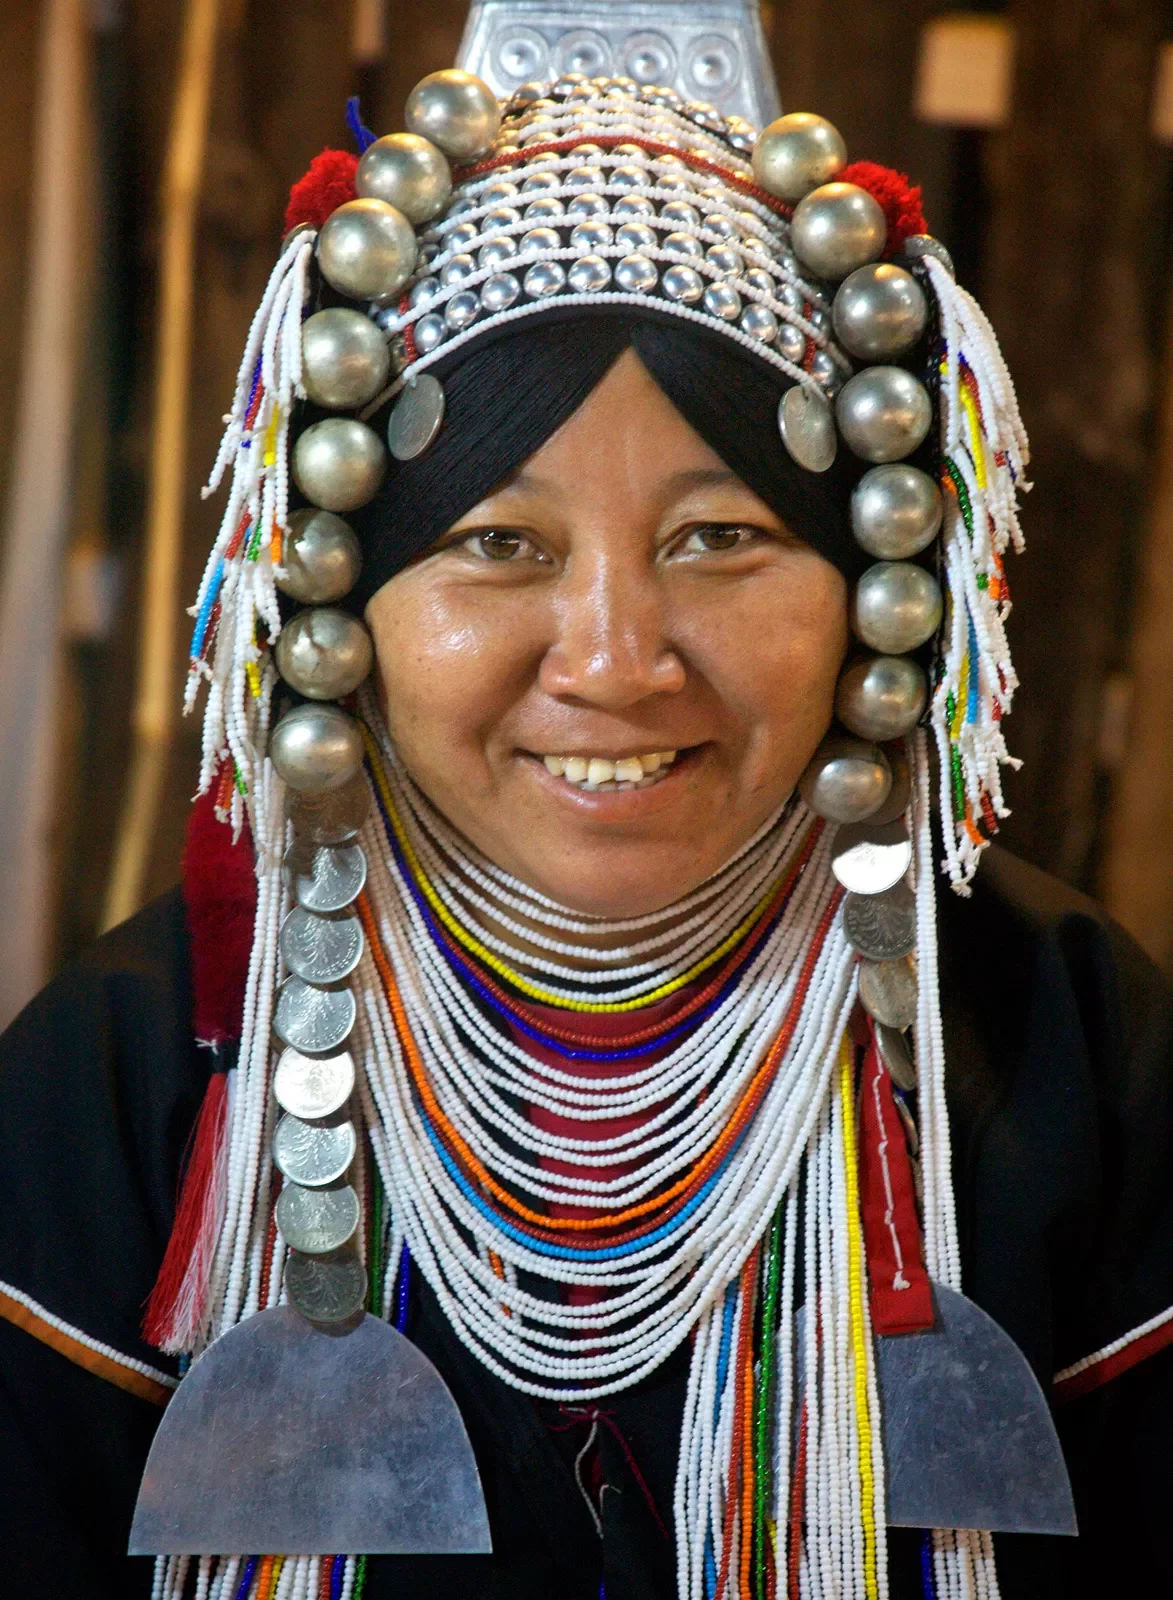 Smiling woman in headress